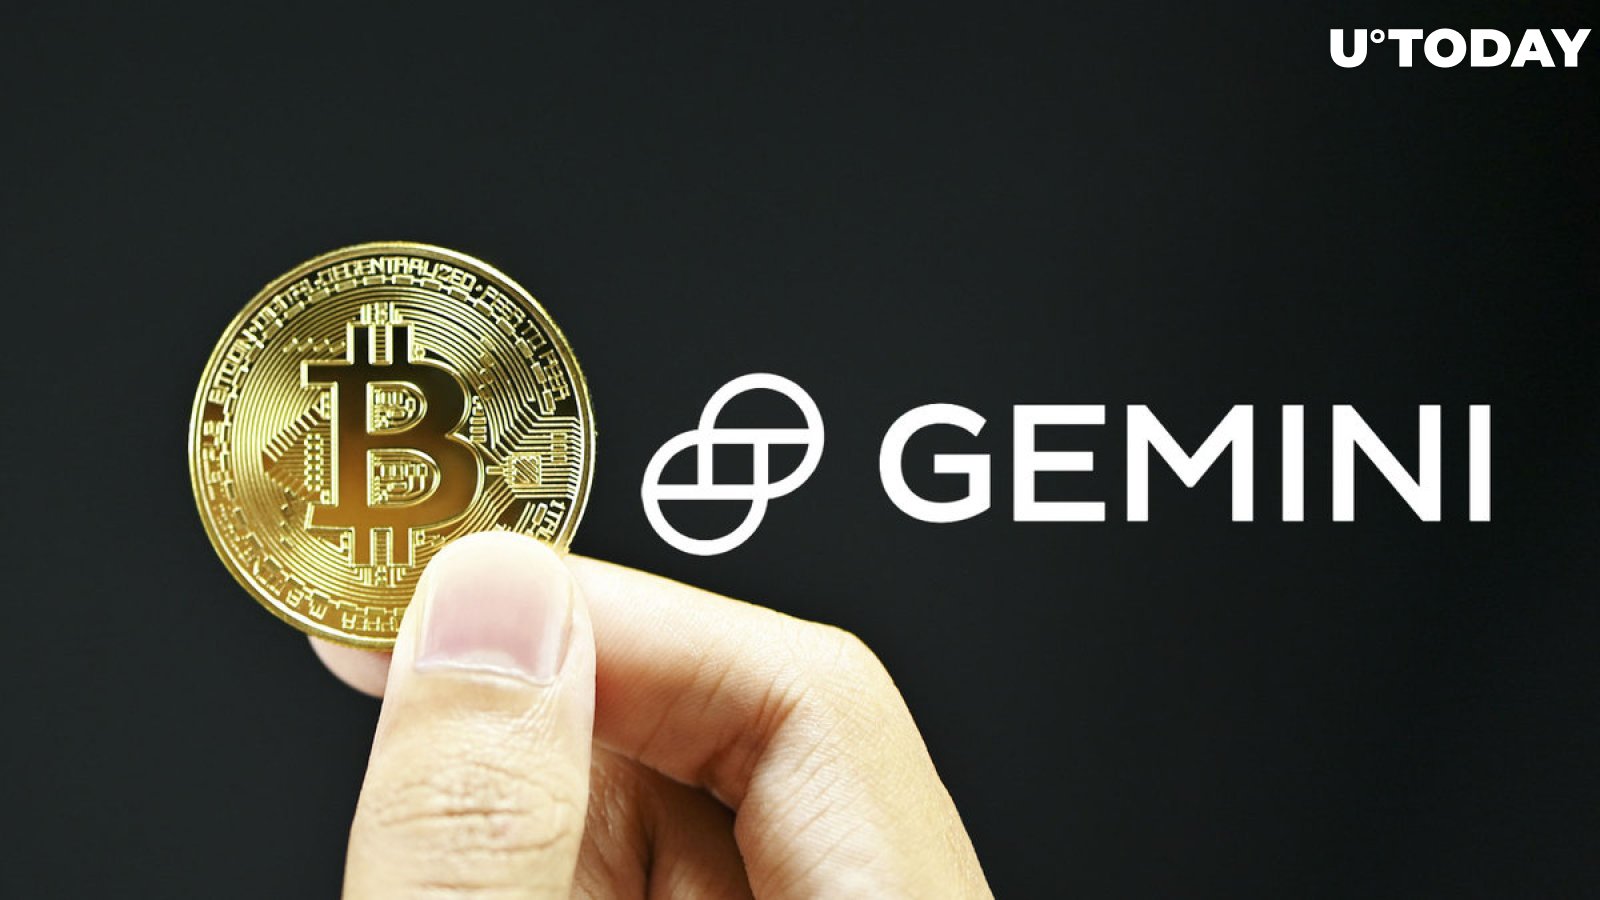 Gemini to Launch Perpetuals Exchange With BTC/GUSD Pair, but There's Caveat